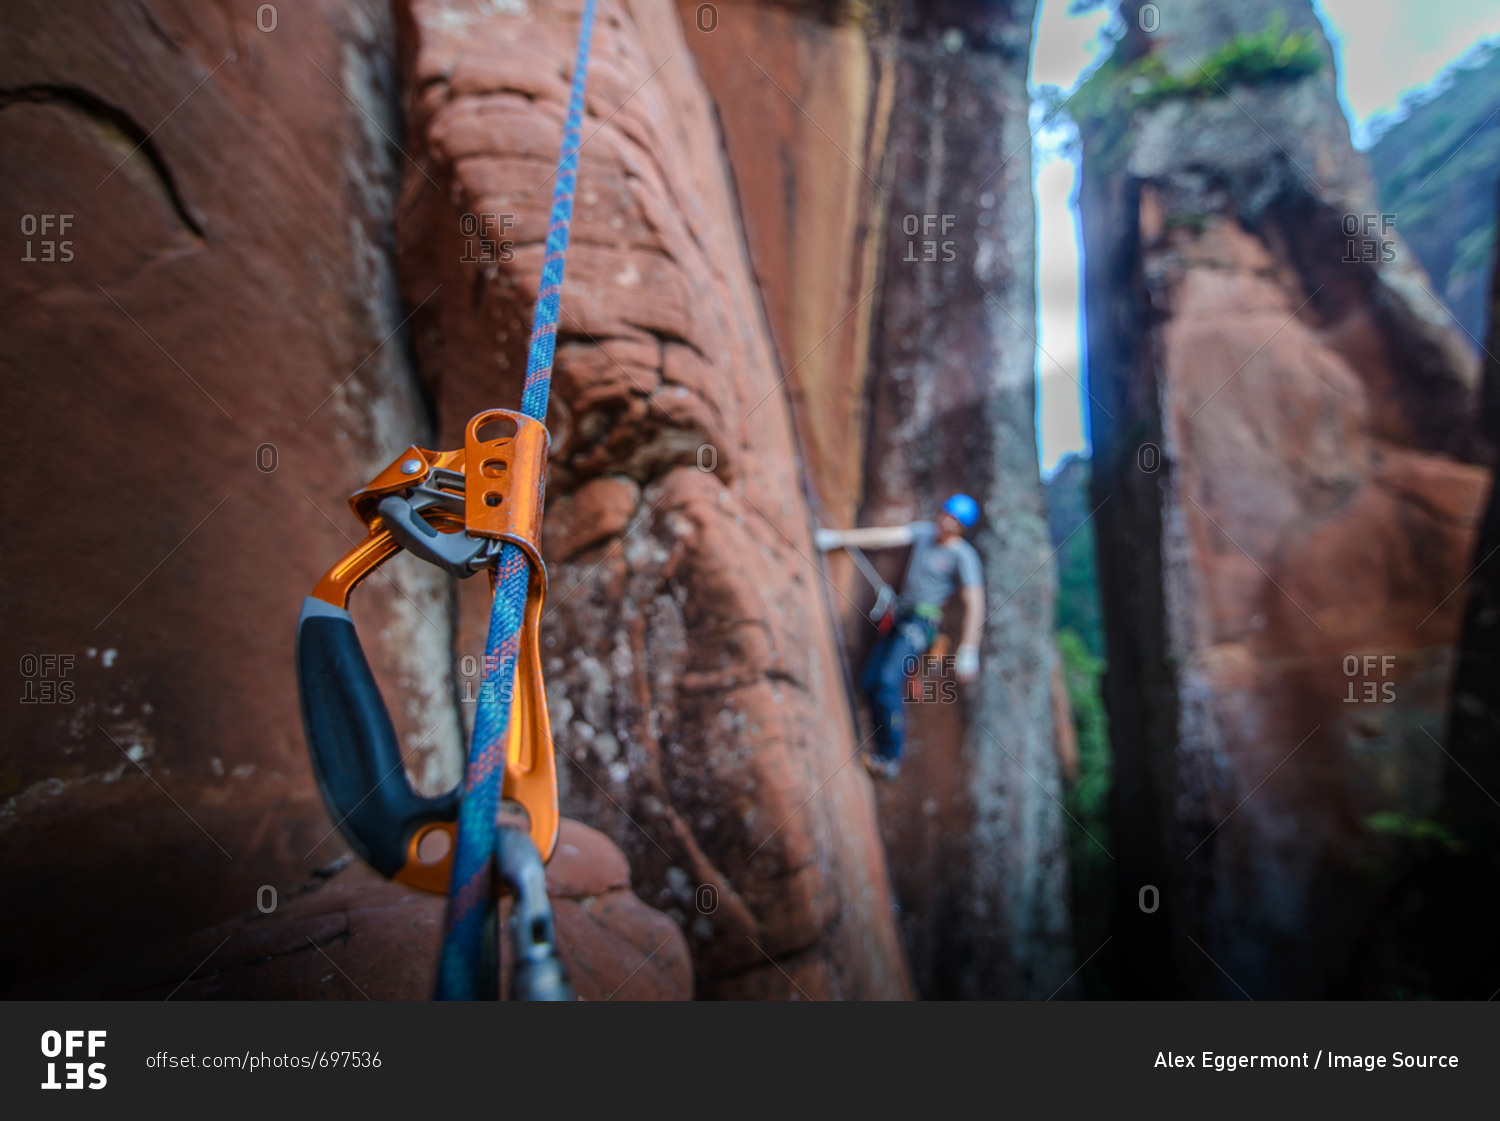 Rock climber climbing sandstone rock, focus on equipment in foreground, Liming, Yunnan Province, China